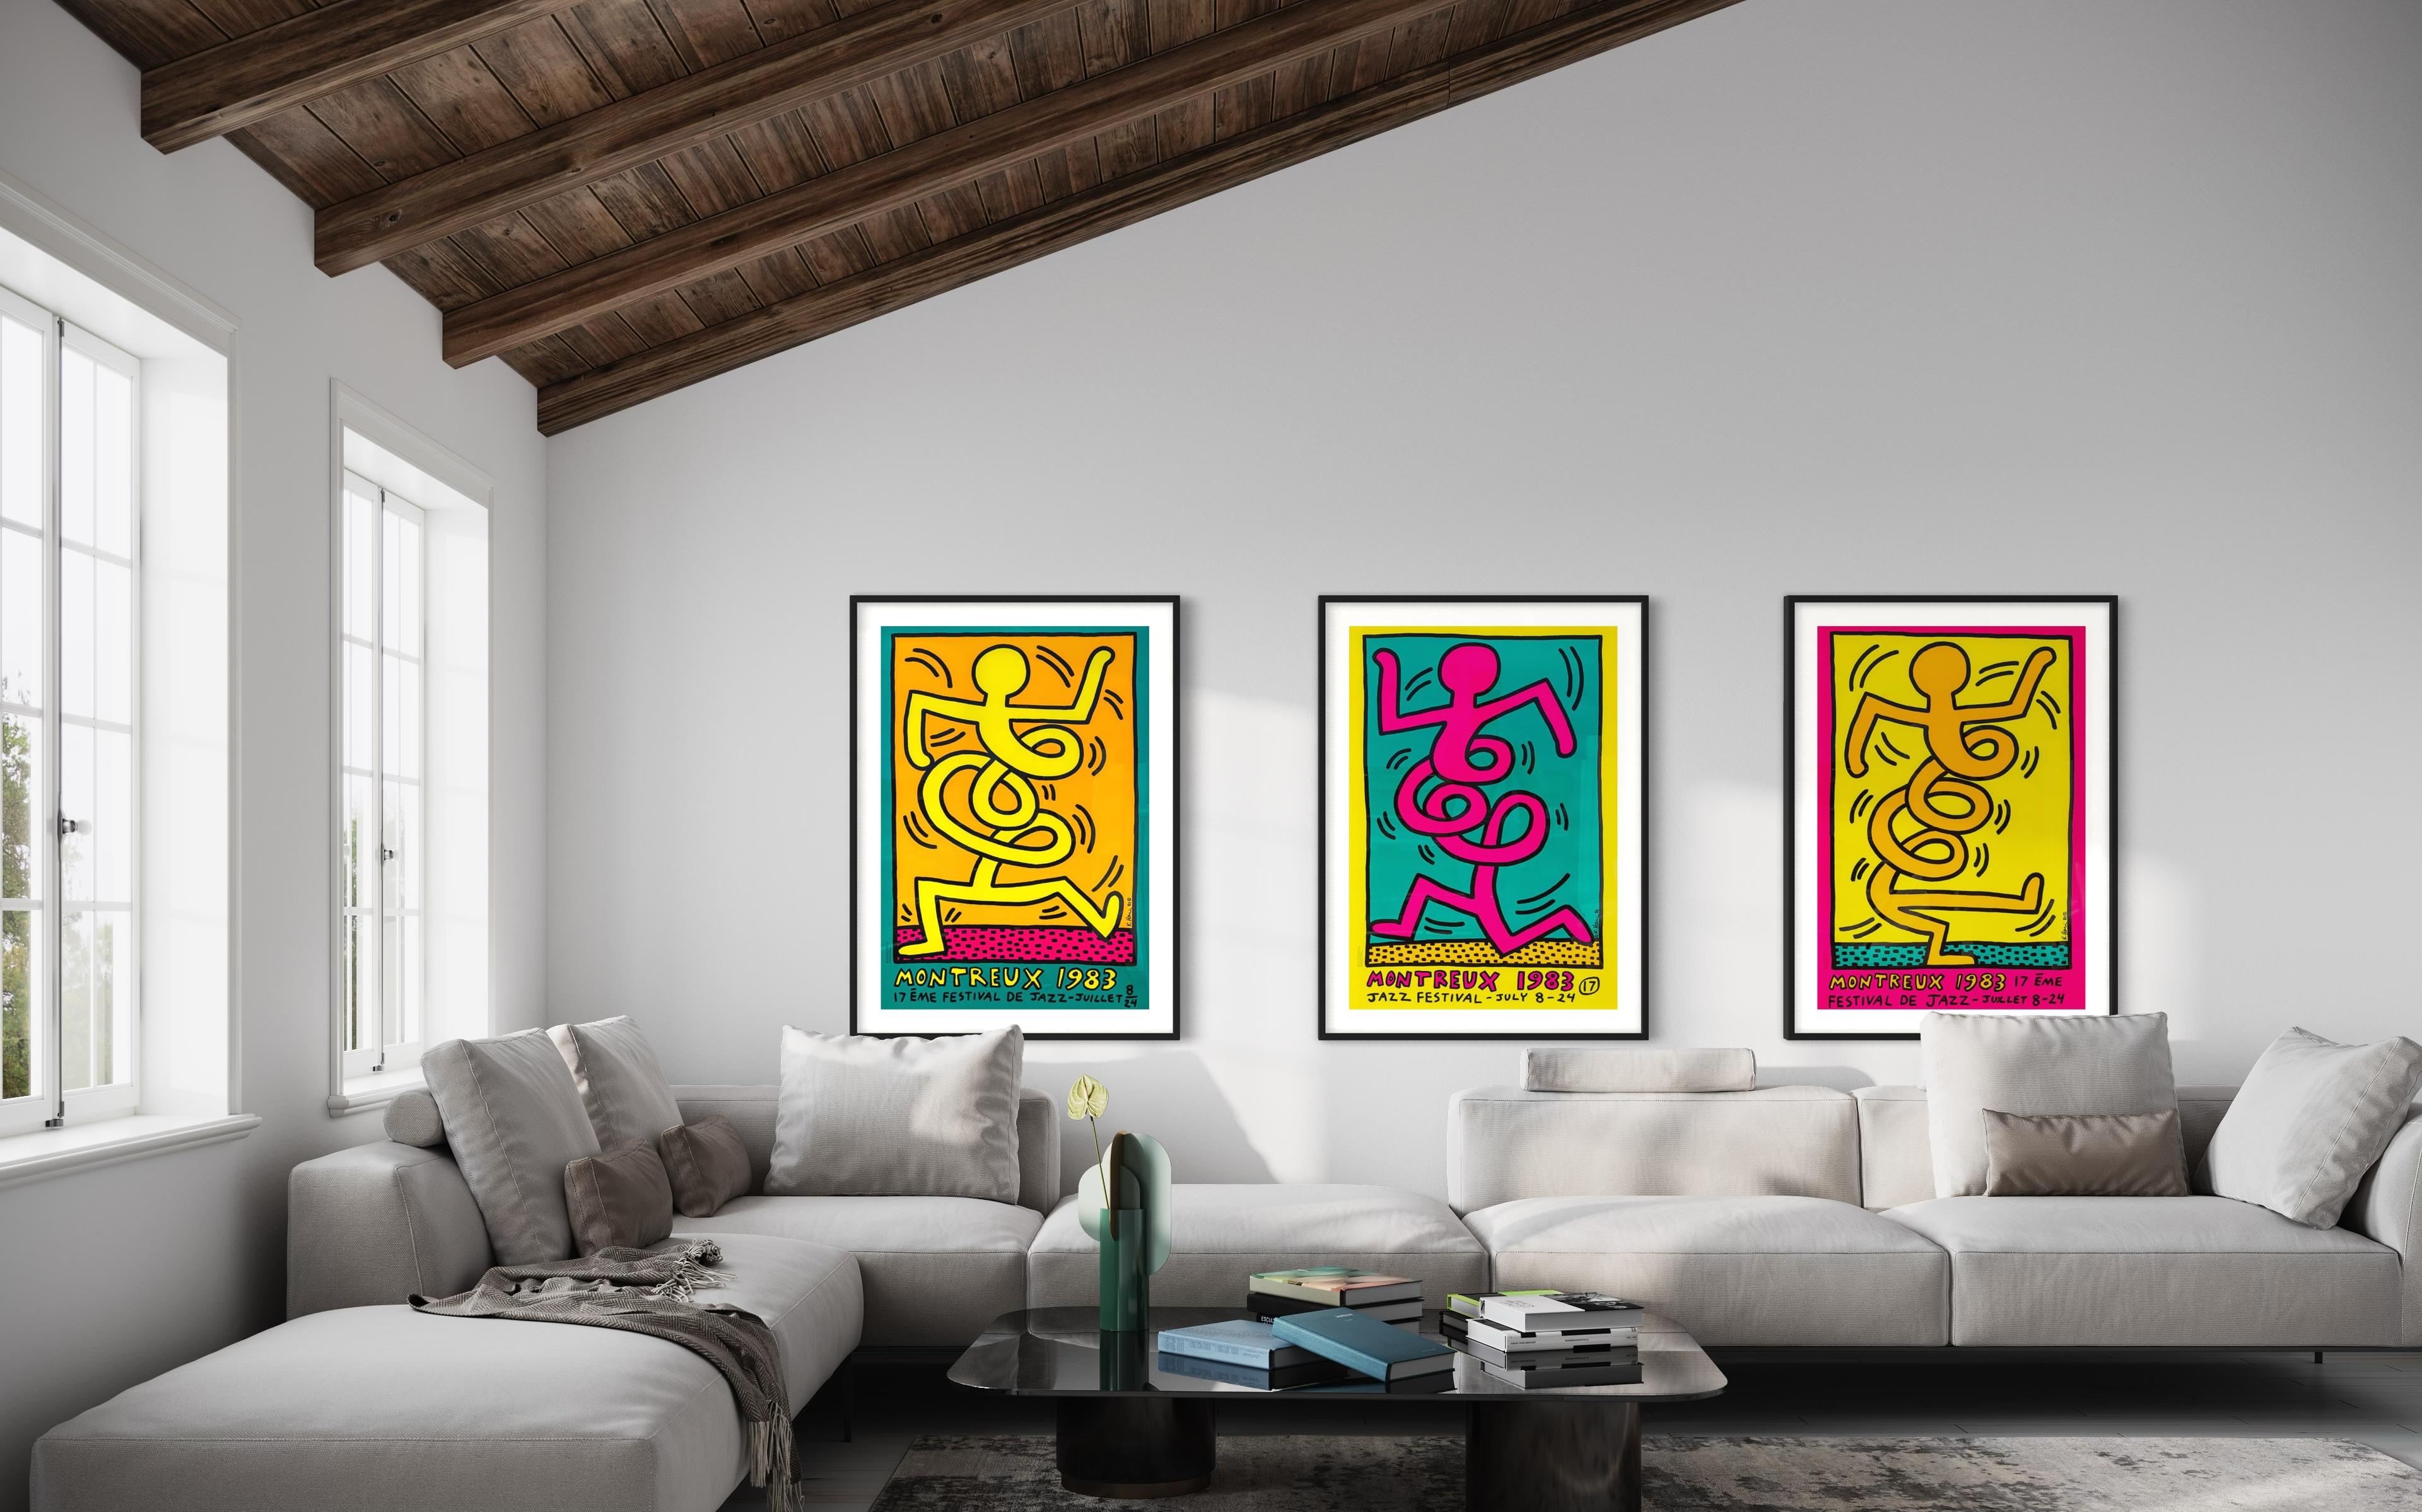 This is a complete set of three screenprints by Keith Haring. The first of these were produced by Keith Haring in 1983 as the official poster for the Montreux Jazz Festival.
The first official exhibition of Keith Haring’s work was held in 1982 at